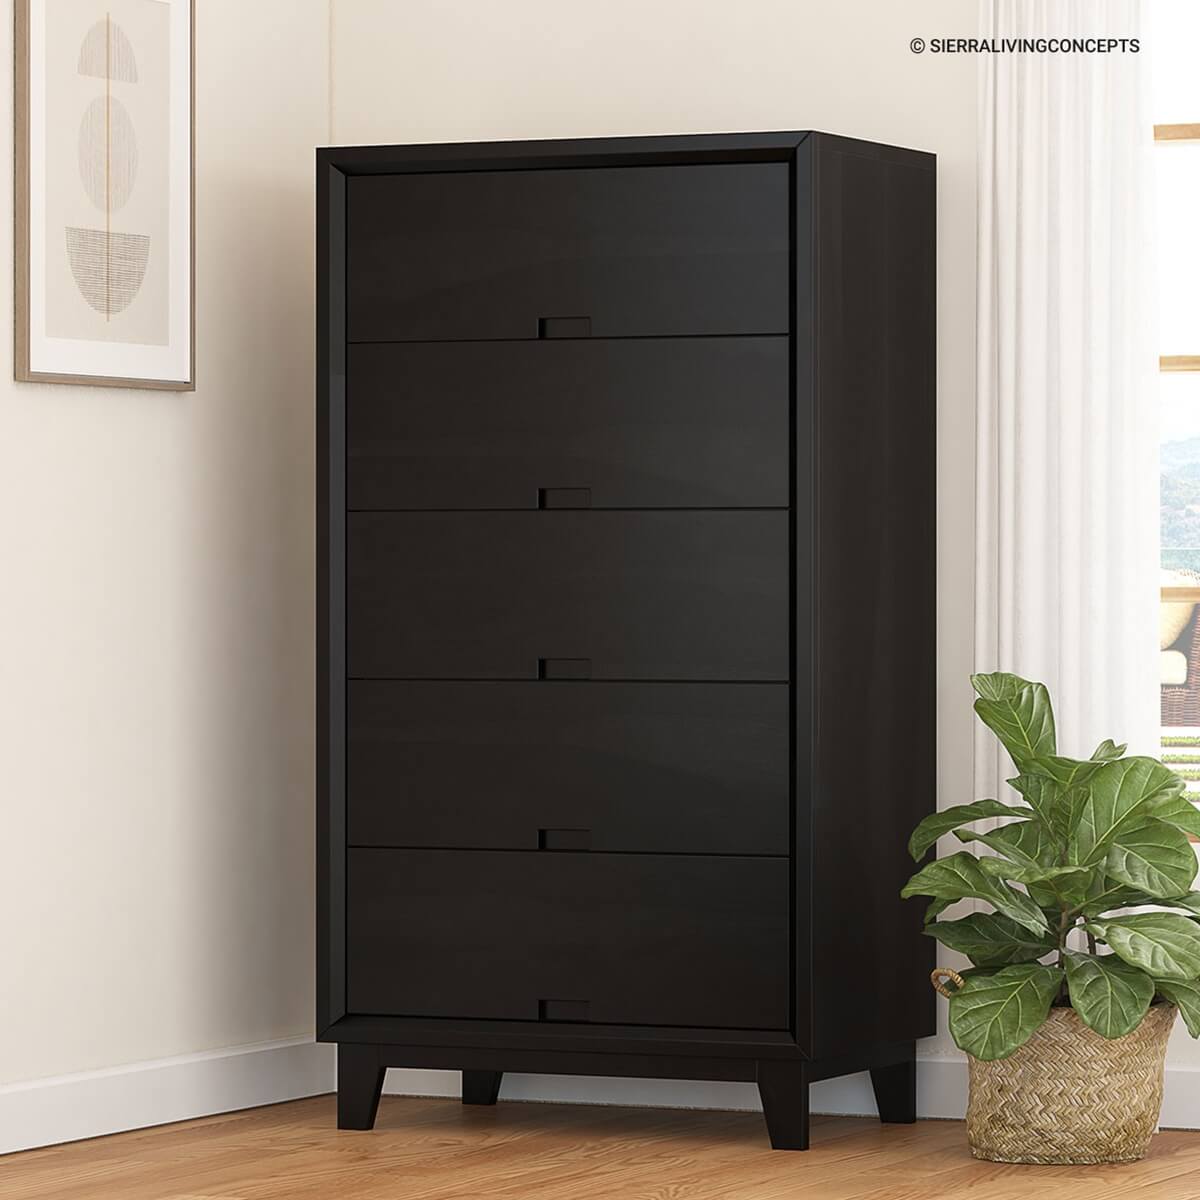 https://www.sierralivingconcepts.com/images/thumbs/0394336_modern-simplicity-solid-wood-black-tall-dresser-with-5-drawers.jpeg